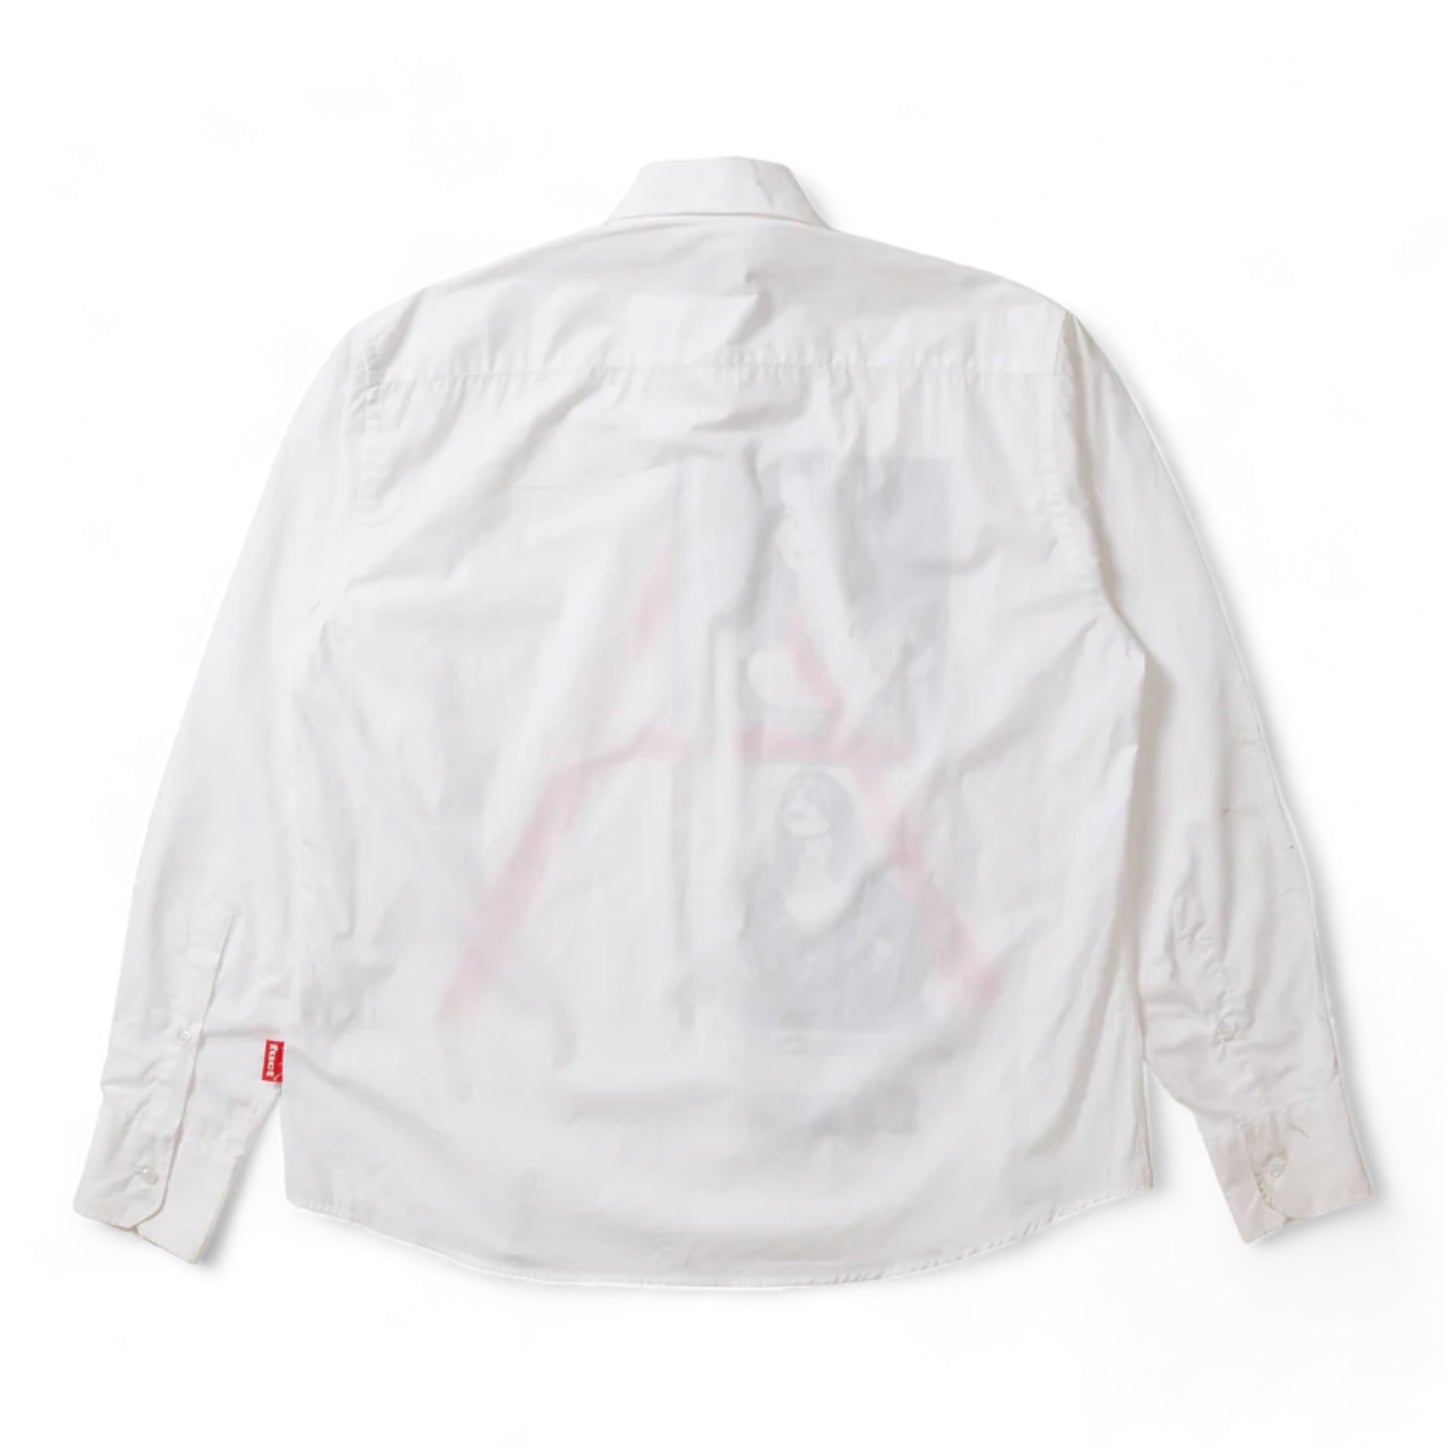 FUCT SPRAY PAINTED "A" BUTTON UP